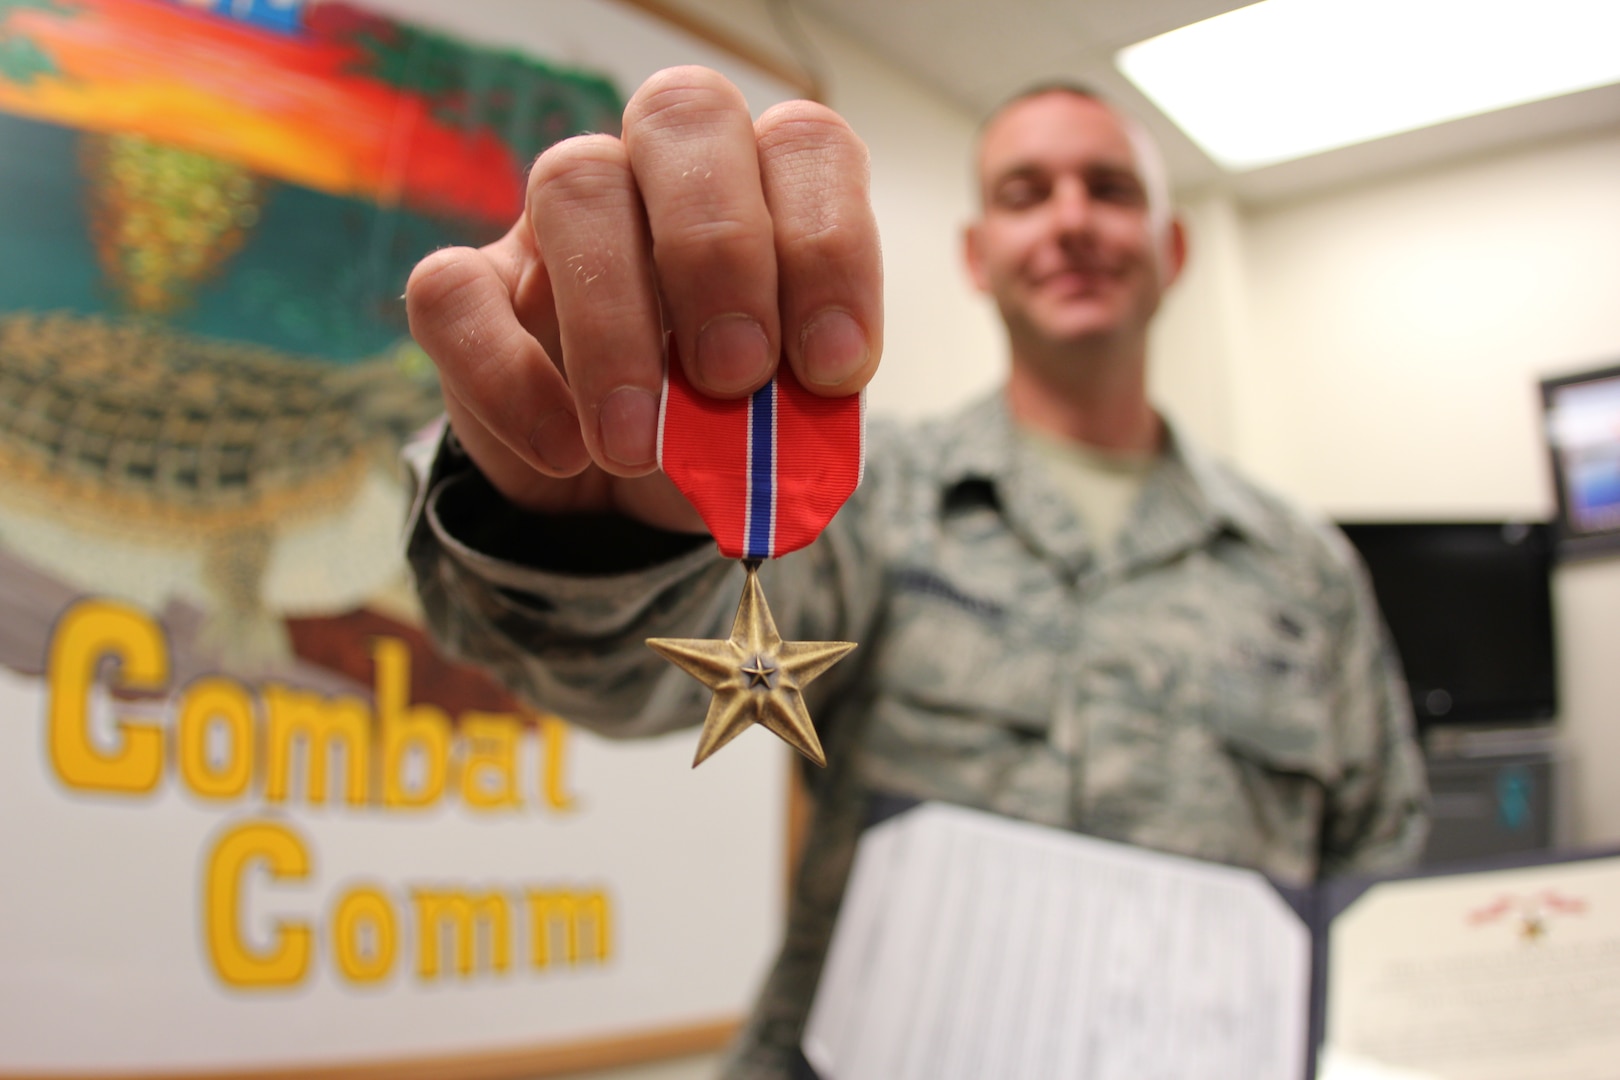 Staff Sgt. Stephen Herron reviews his Bronze Star medal and citation in the 52nd Combat Communications Squadron front office. Herron was presented the medal at a 689th Combat Communications Wing field commander's call, Oct. 31. Herron received the award for his efforts during his seven month deployment in support of forward deployed EOD teams. (U.S. Air Force photo/Robert A. Talenti)